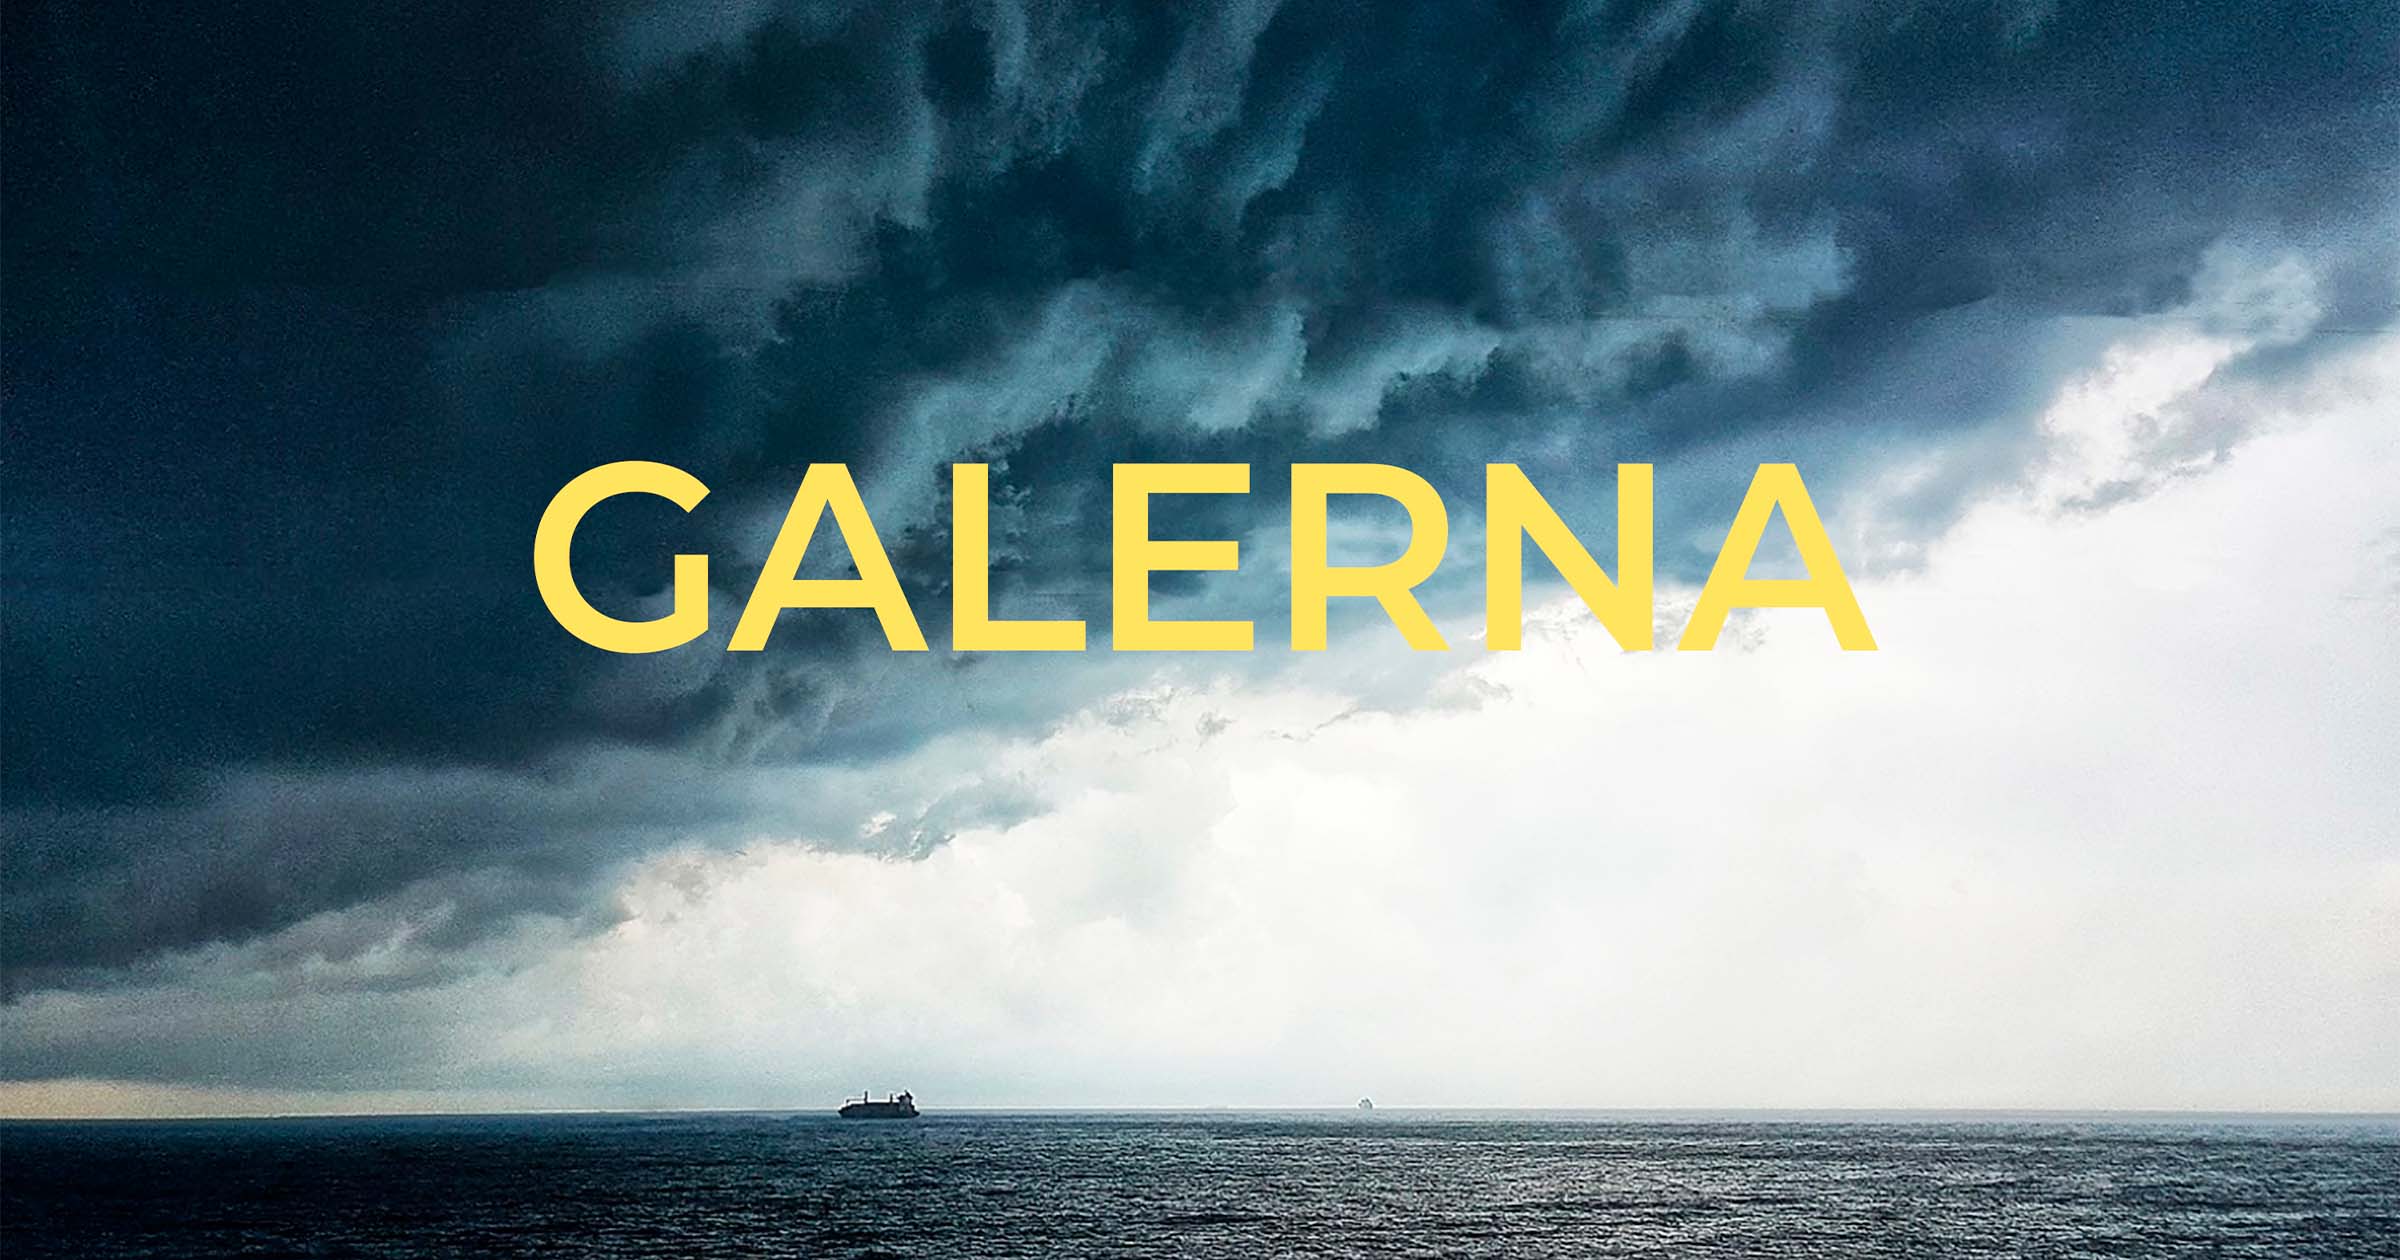 BERMEO AND THE “GALERNA”, THE GULF OF BISCAY’S CAT. 1 HURRICANE